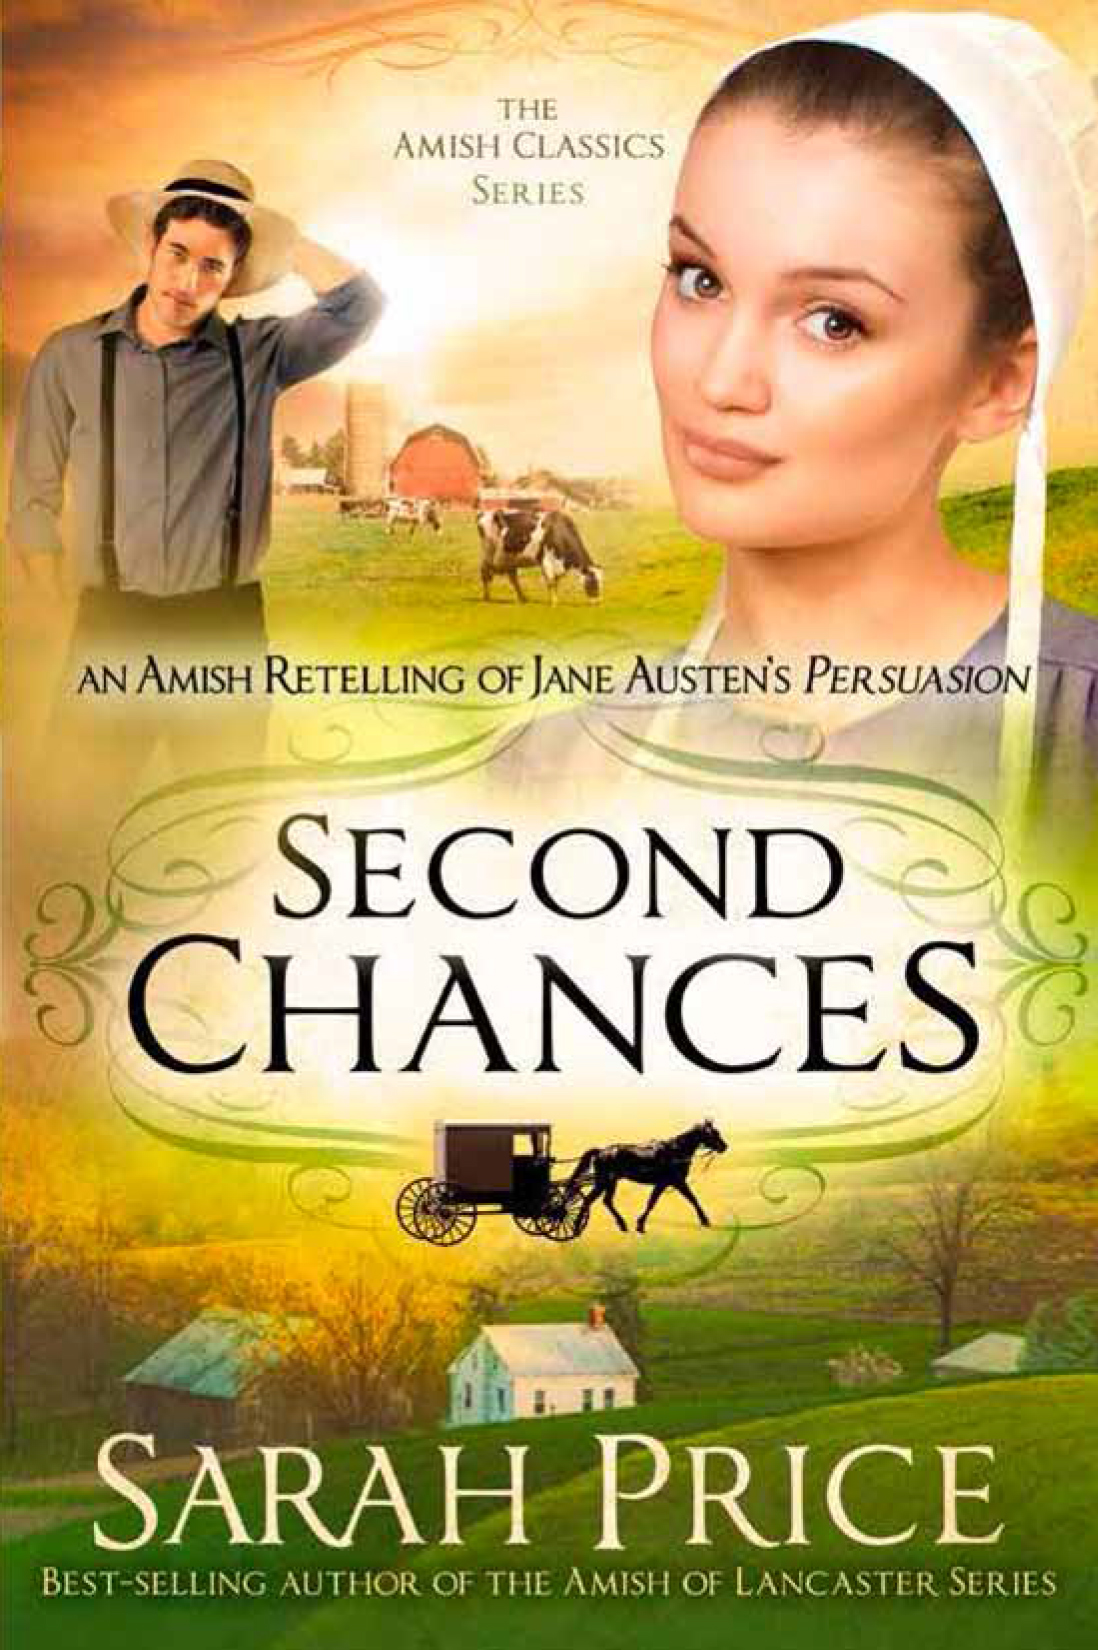 Second Chances (2015) by Sarah Price